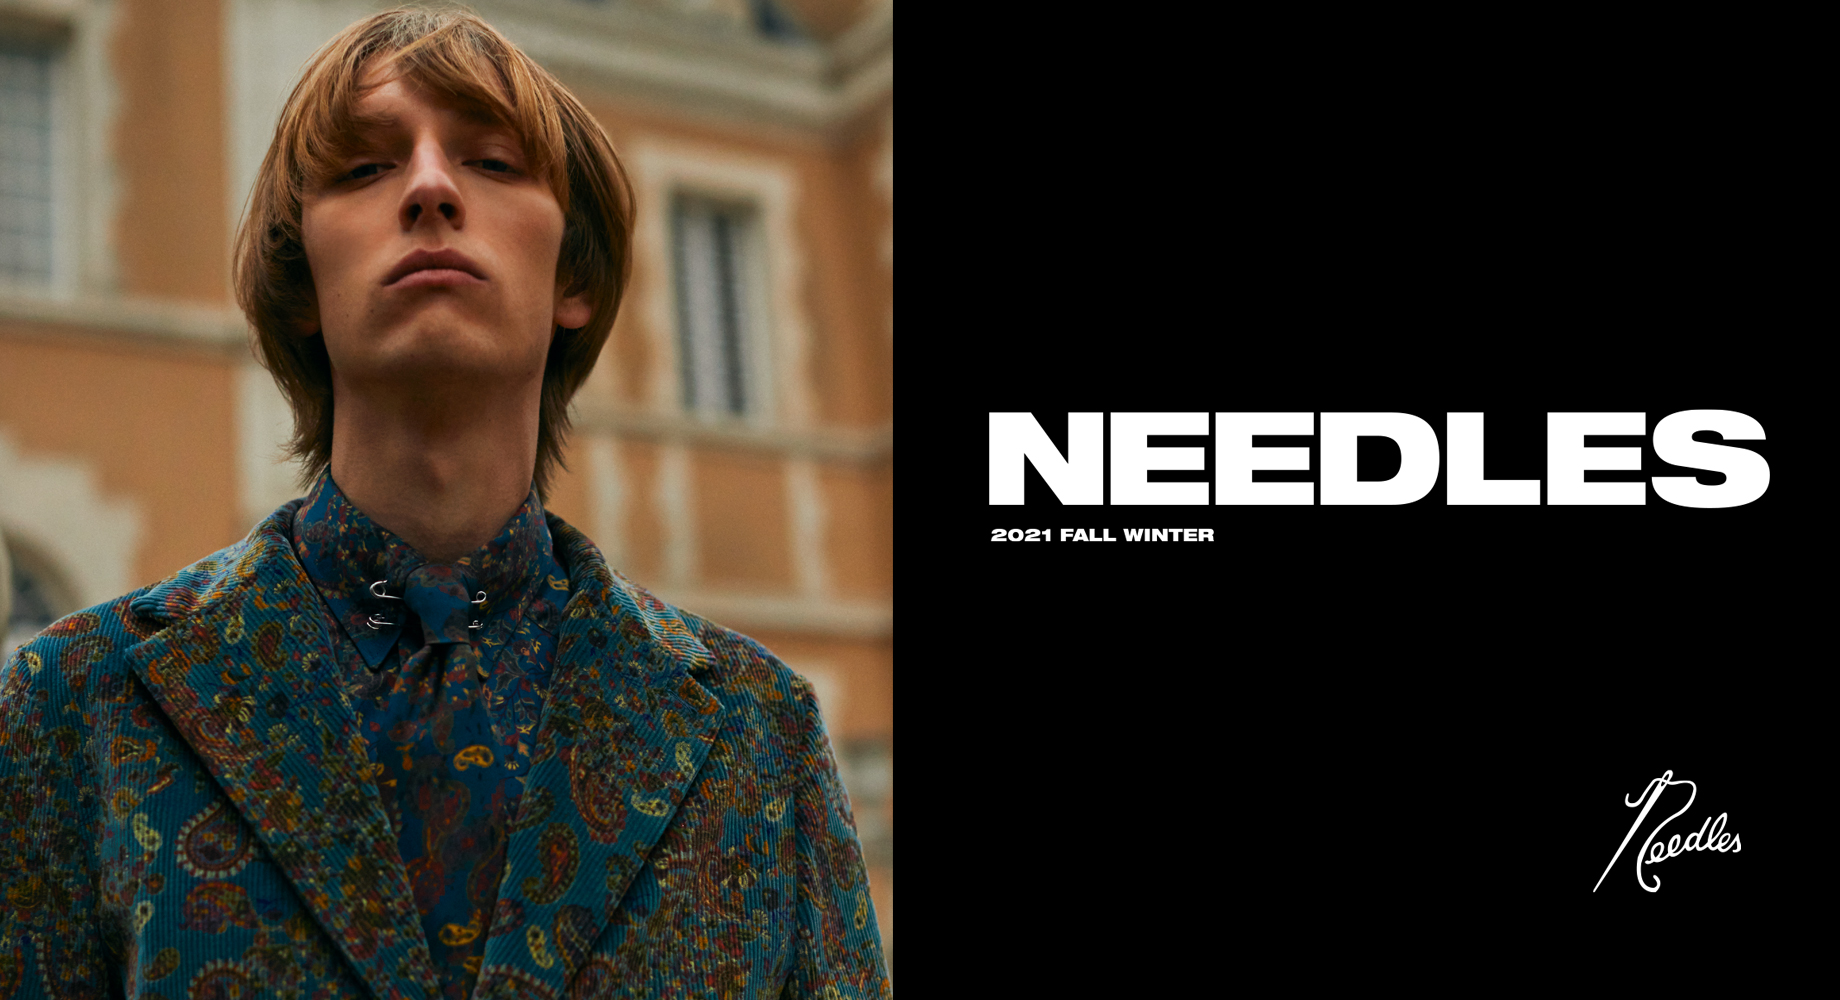 〈NEEDLES〉2021 FALL WINTER COLLECTION